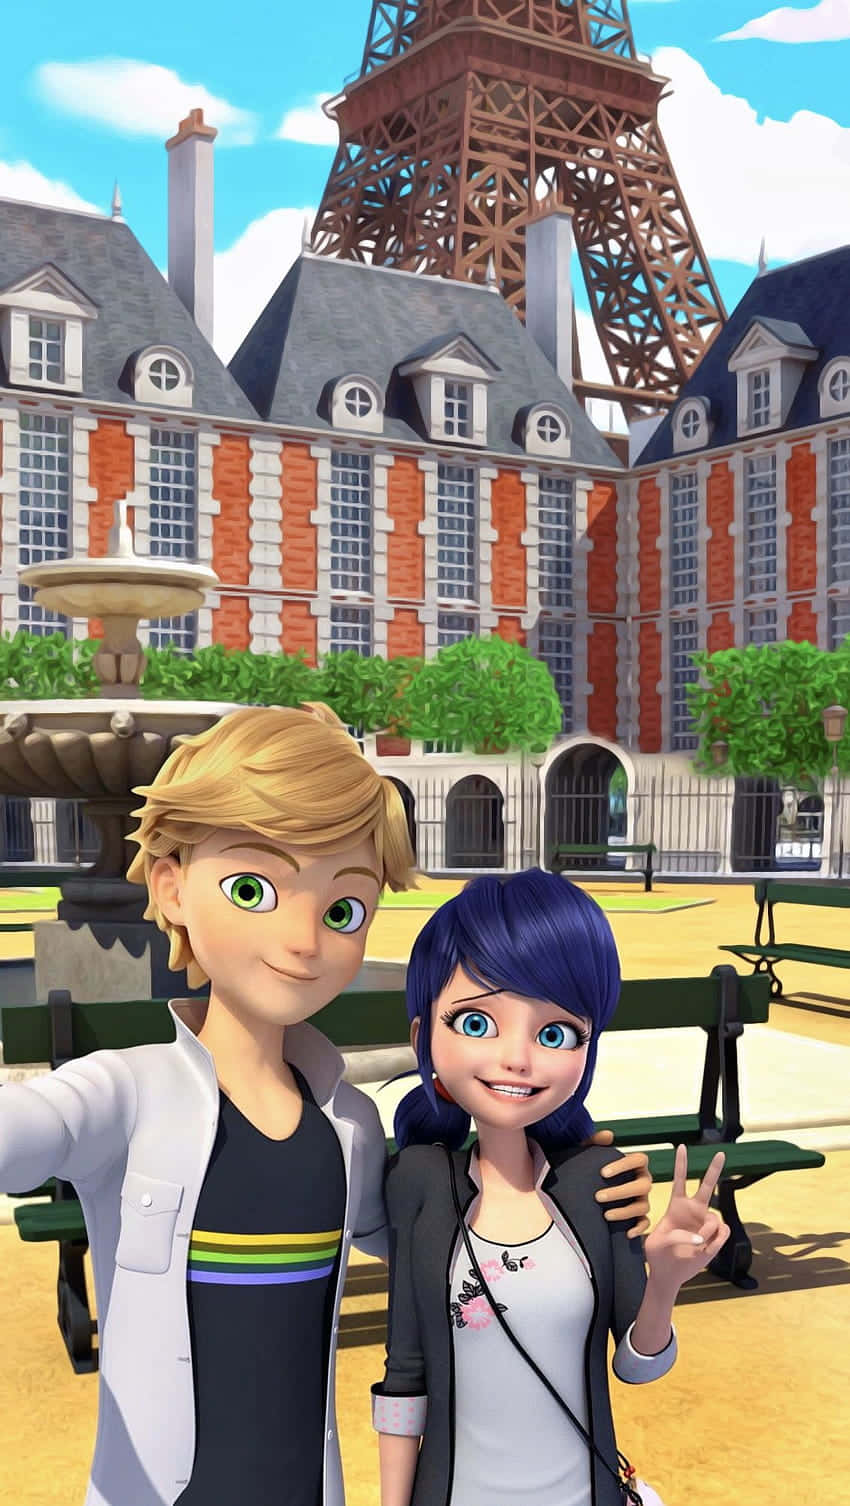 Adrien and Marinette share a magical embrace in Paris. Wallpaper